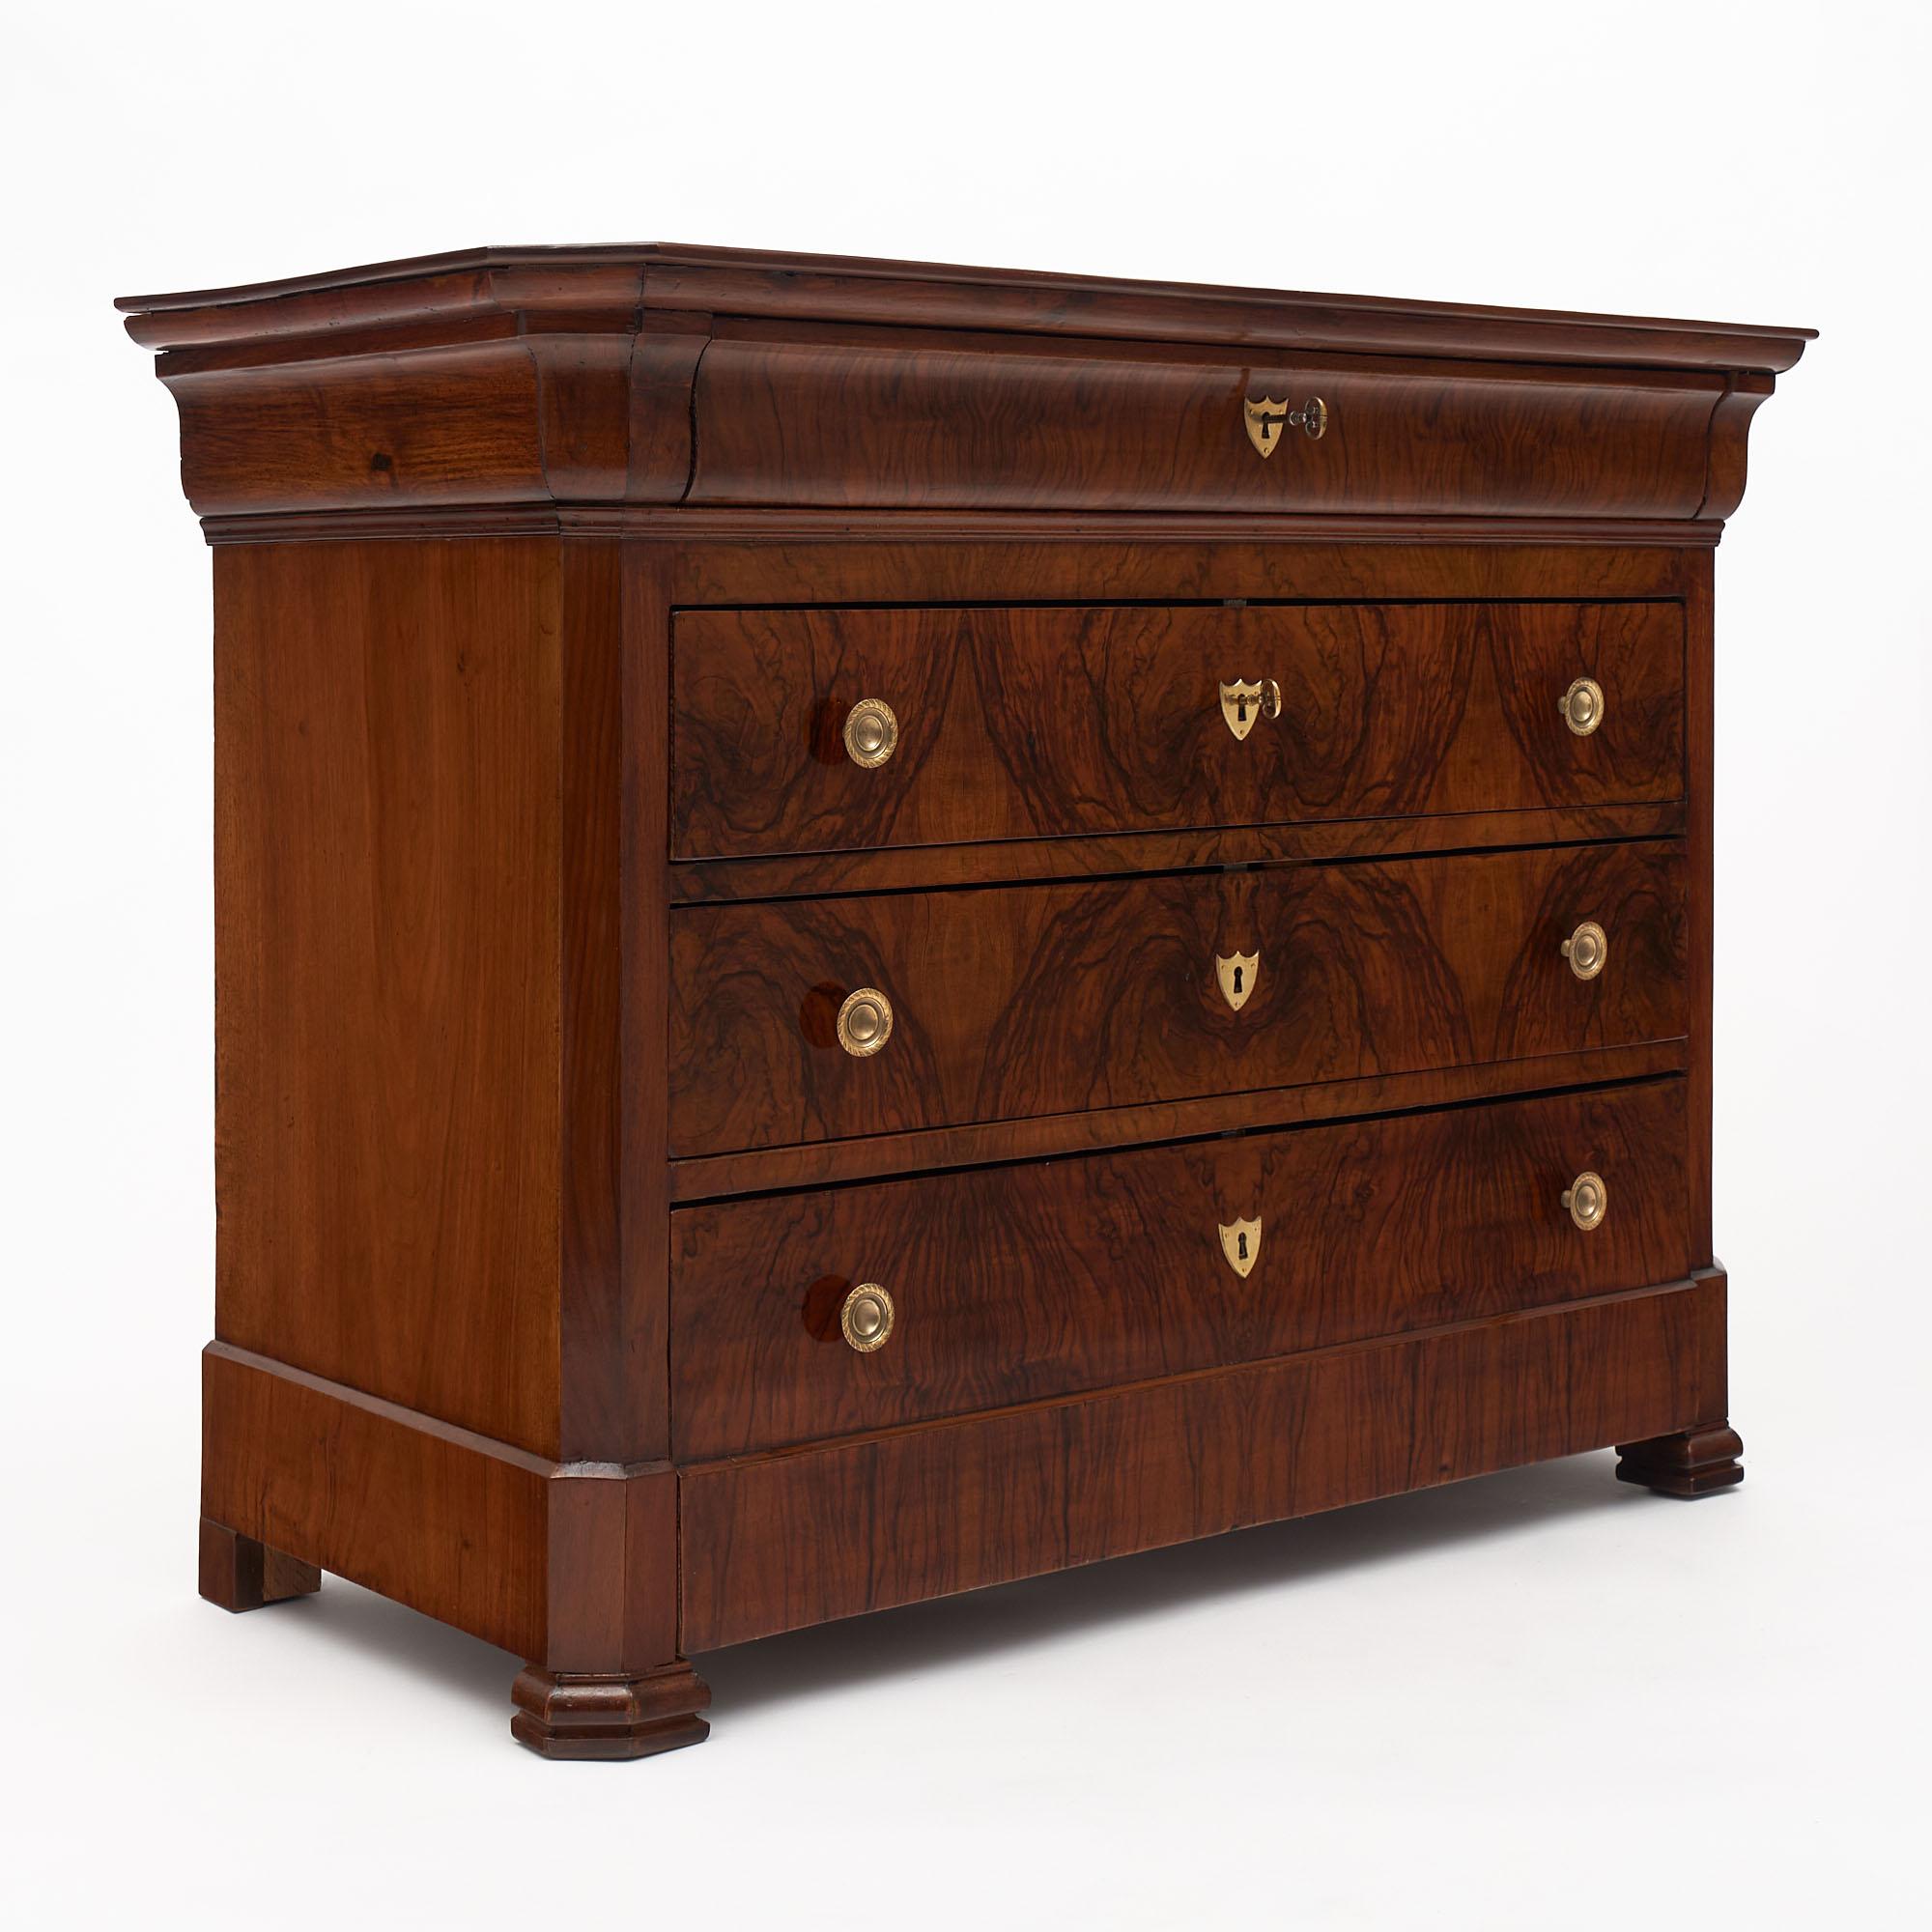 Chest from France in the Louis Philippe period. This piece is made of solid walnut and burled walnut with four dovetailed drawers and finely cast bronze hardware.